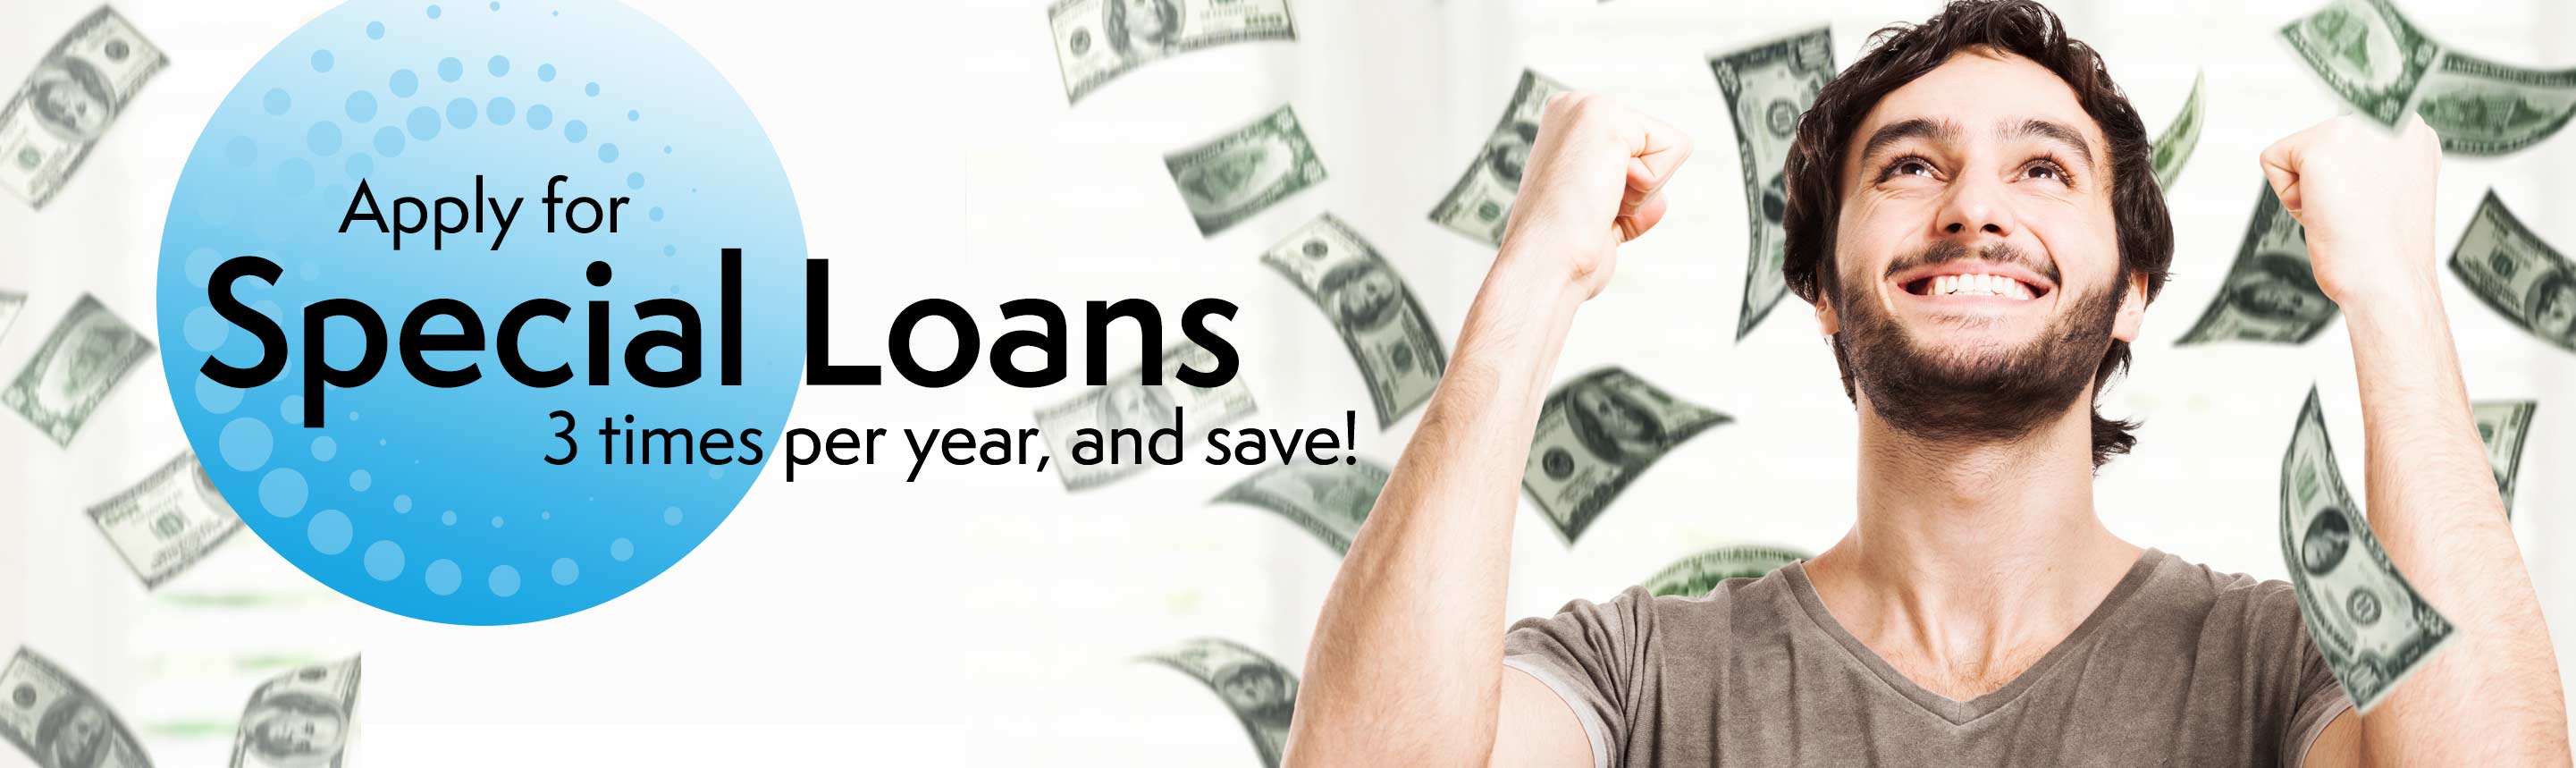 Apply for special loans three times per year, and save!